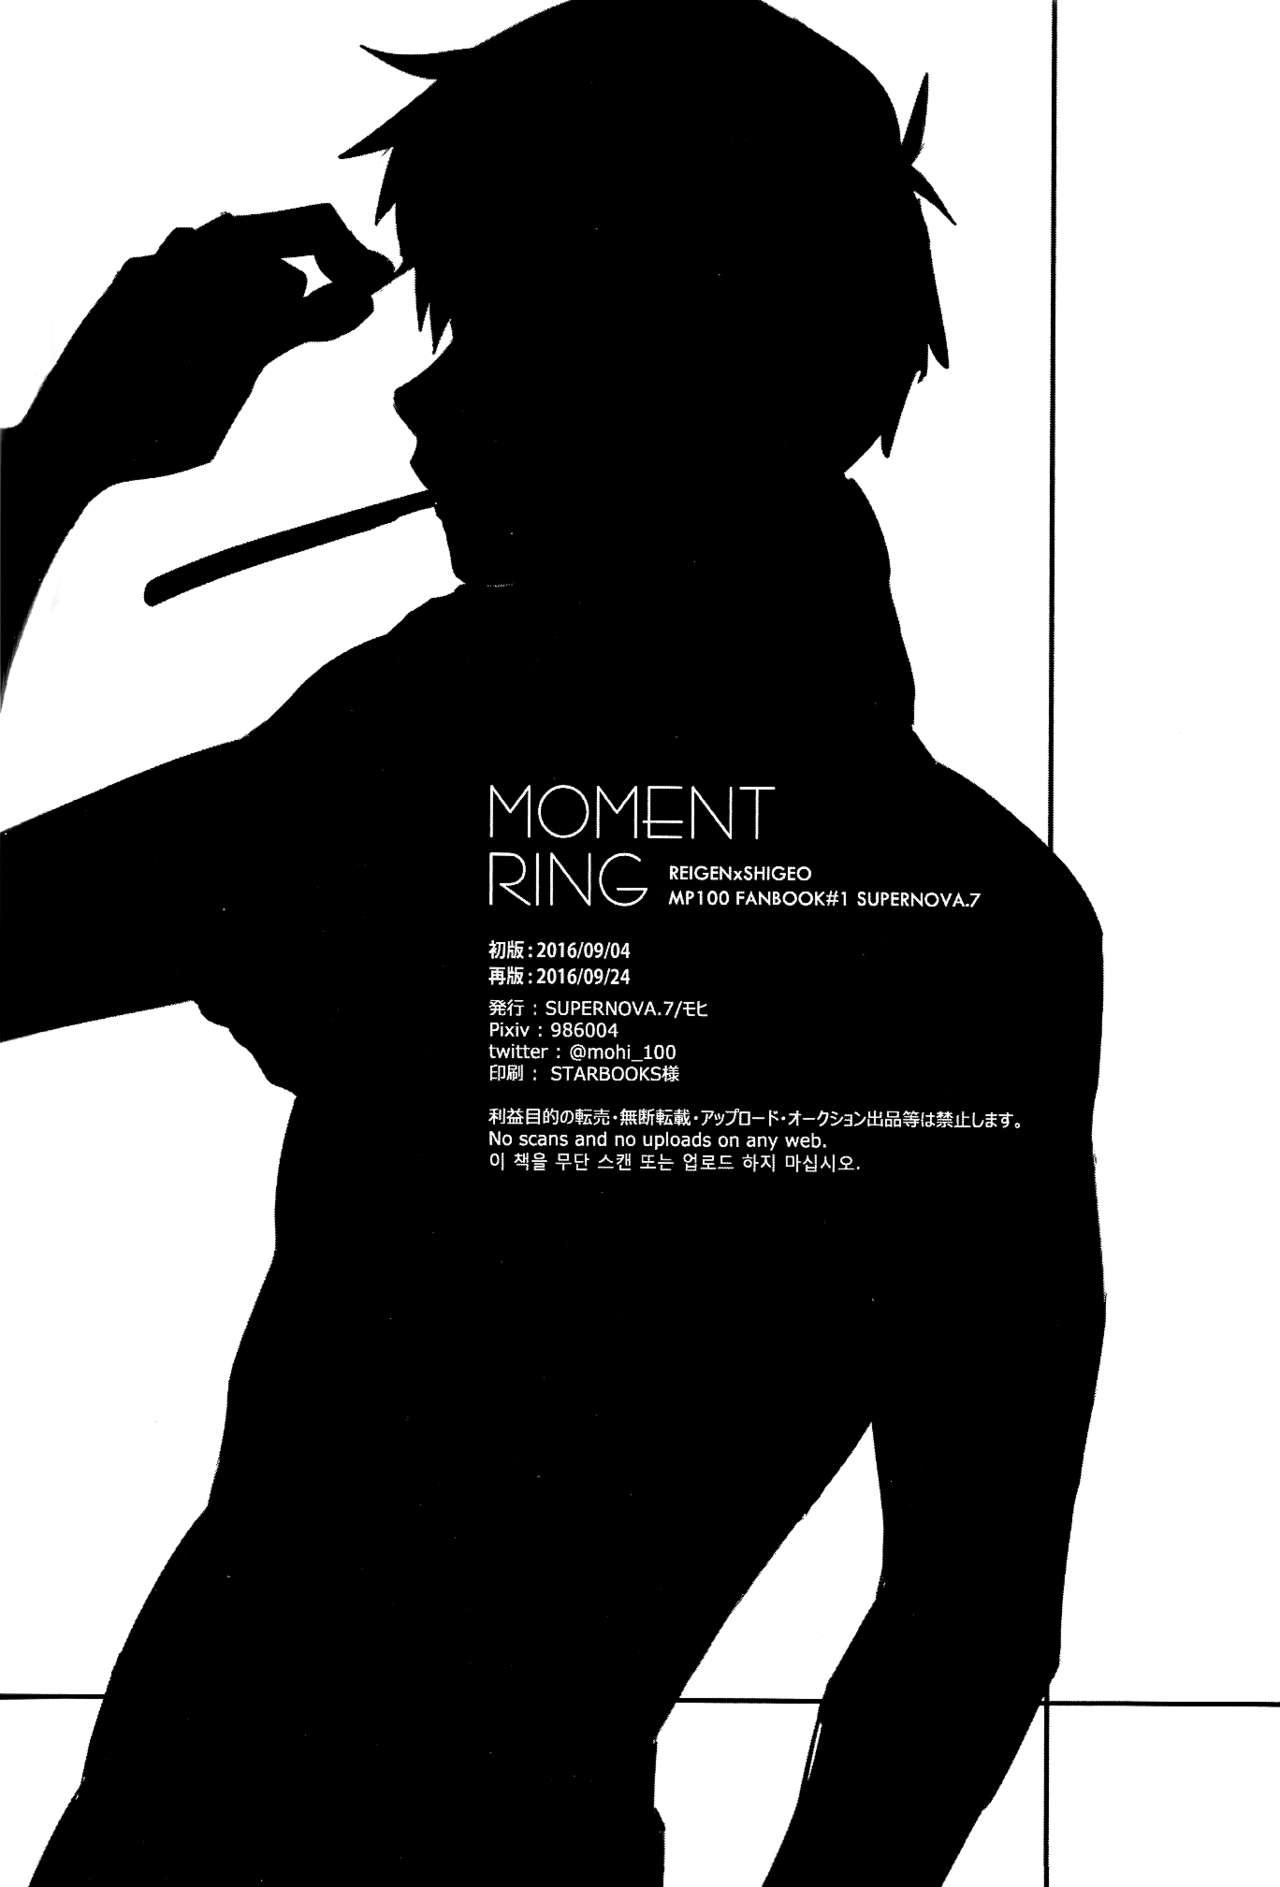 Moment Ring 29